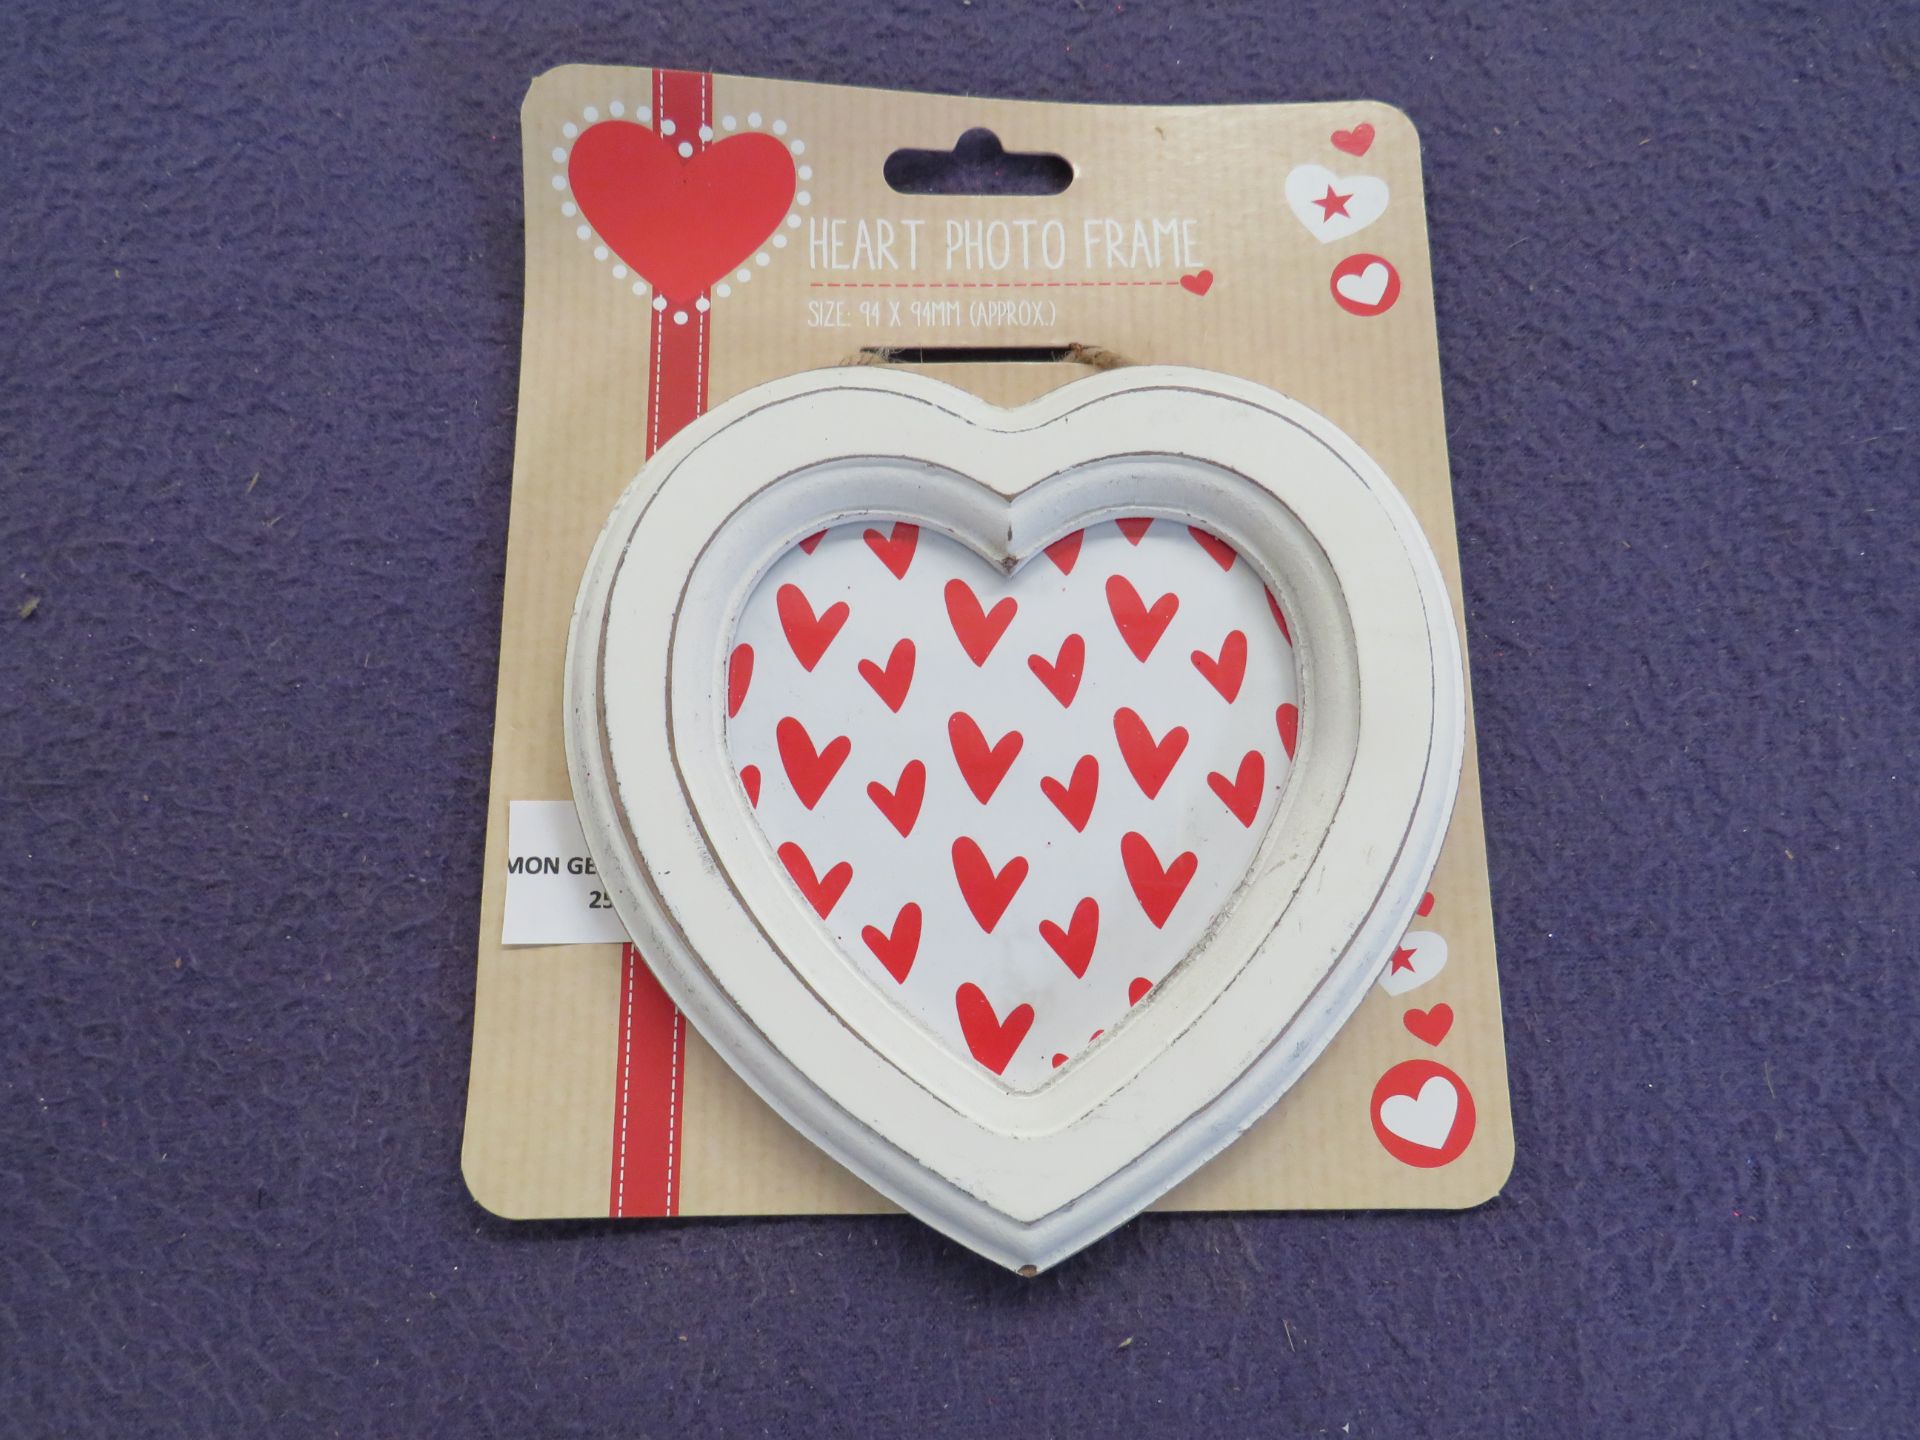 8x Valentine's Heart Shaped Photo Frame 94x94mm Approx - All Unused.